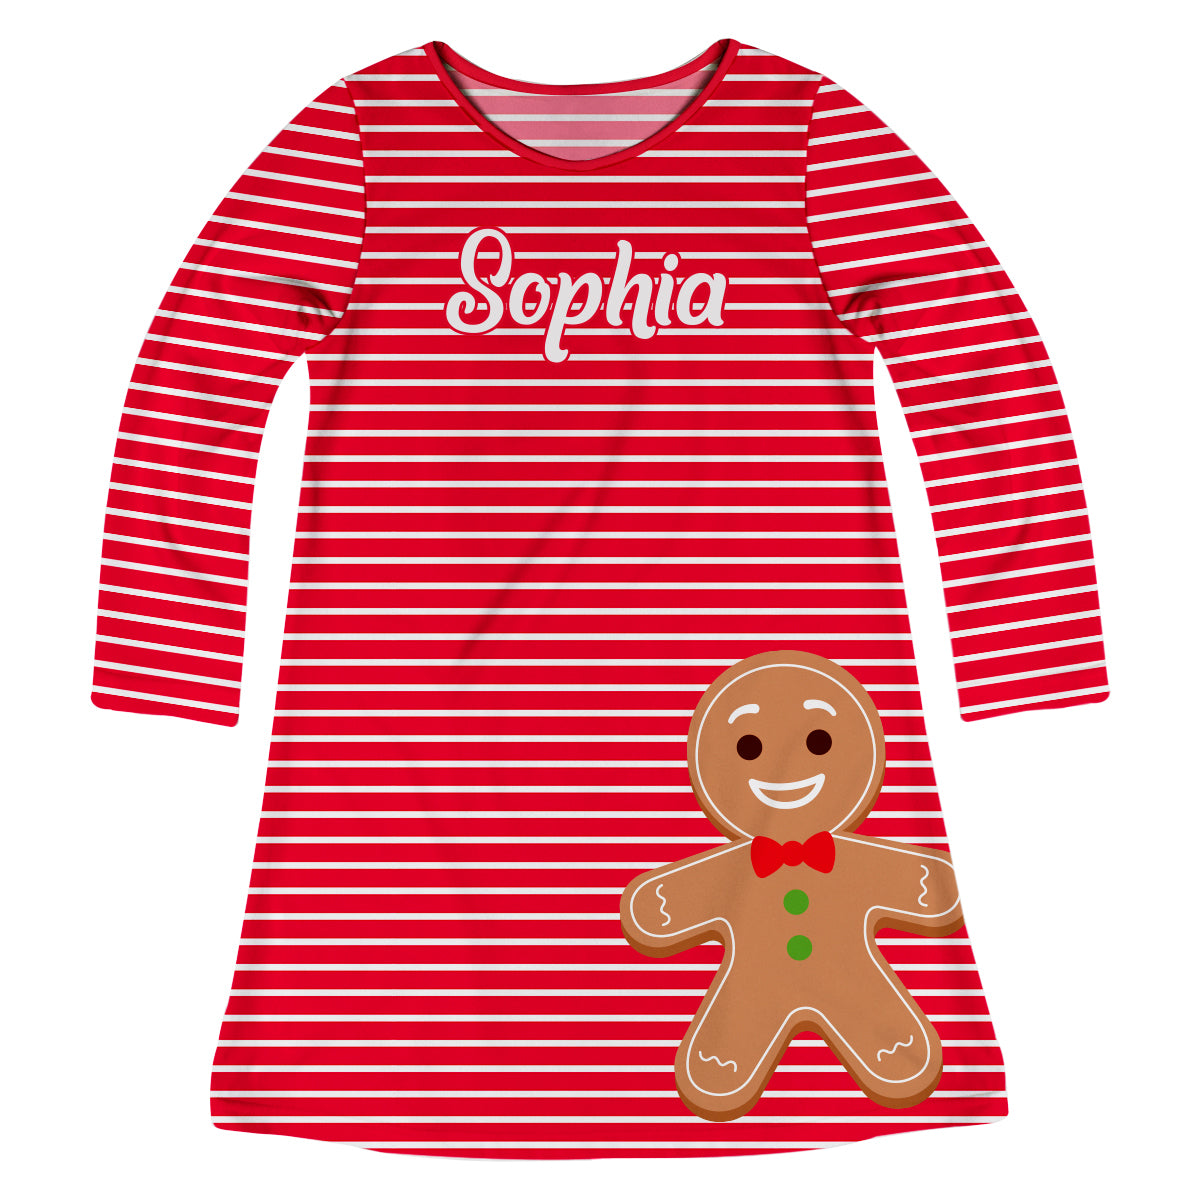 Red and white stripes gingerbread girls a line dress with name - Wimziy&Co.